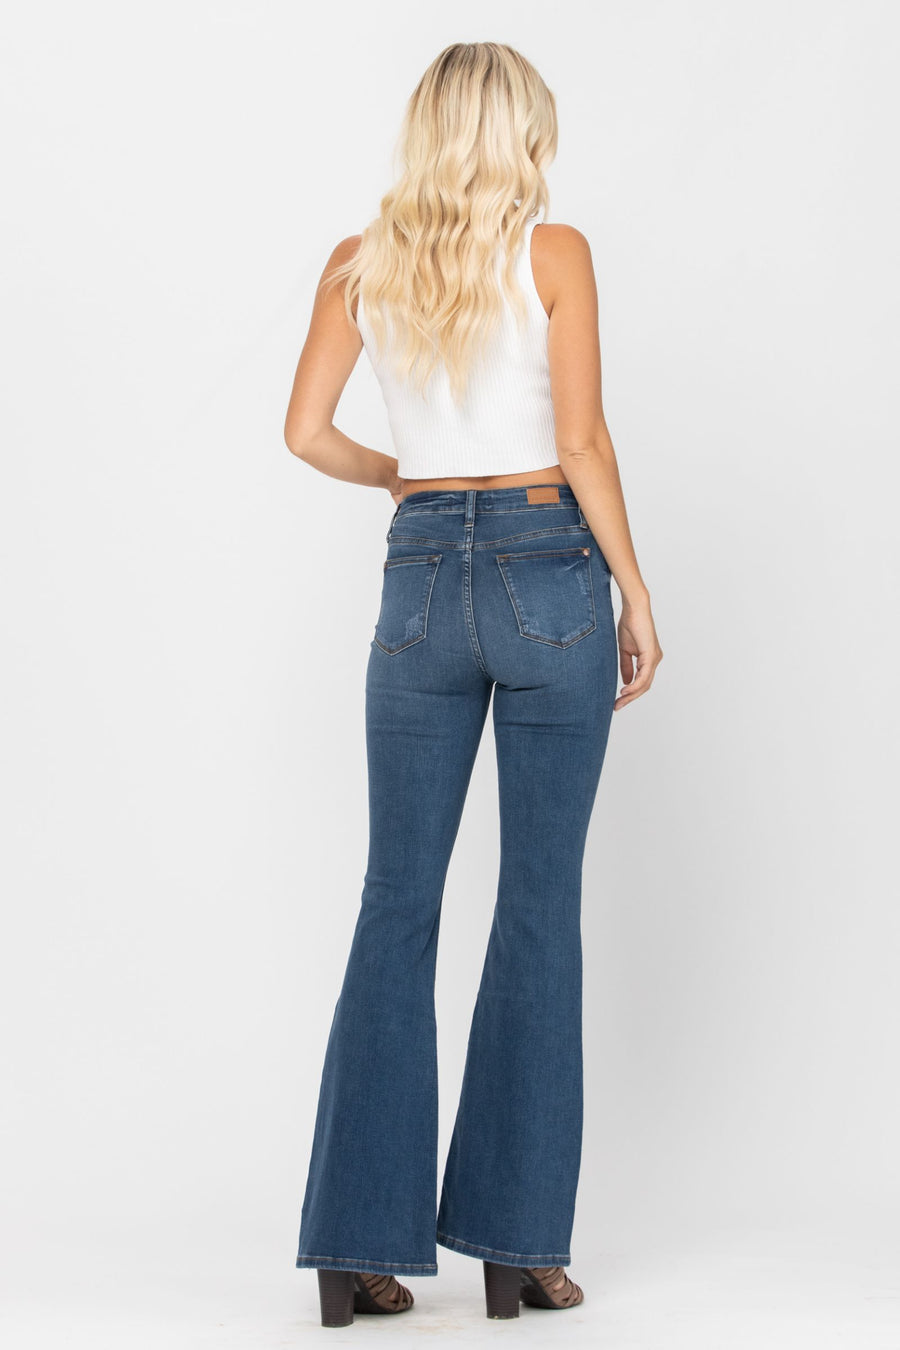 Must Have Flair Jeans